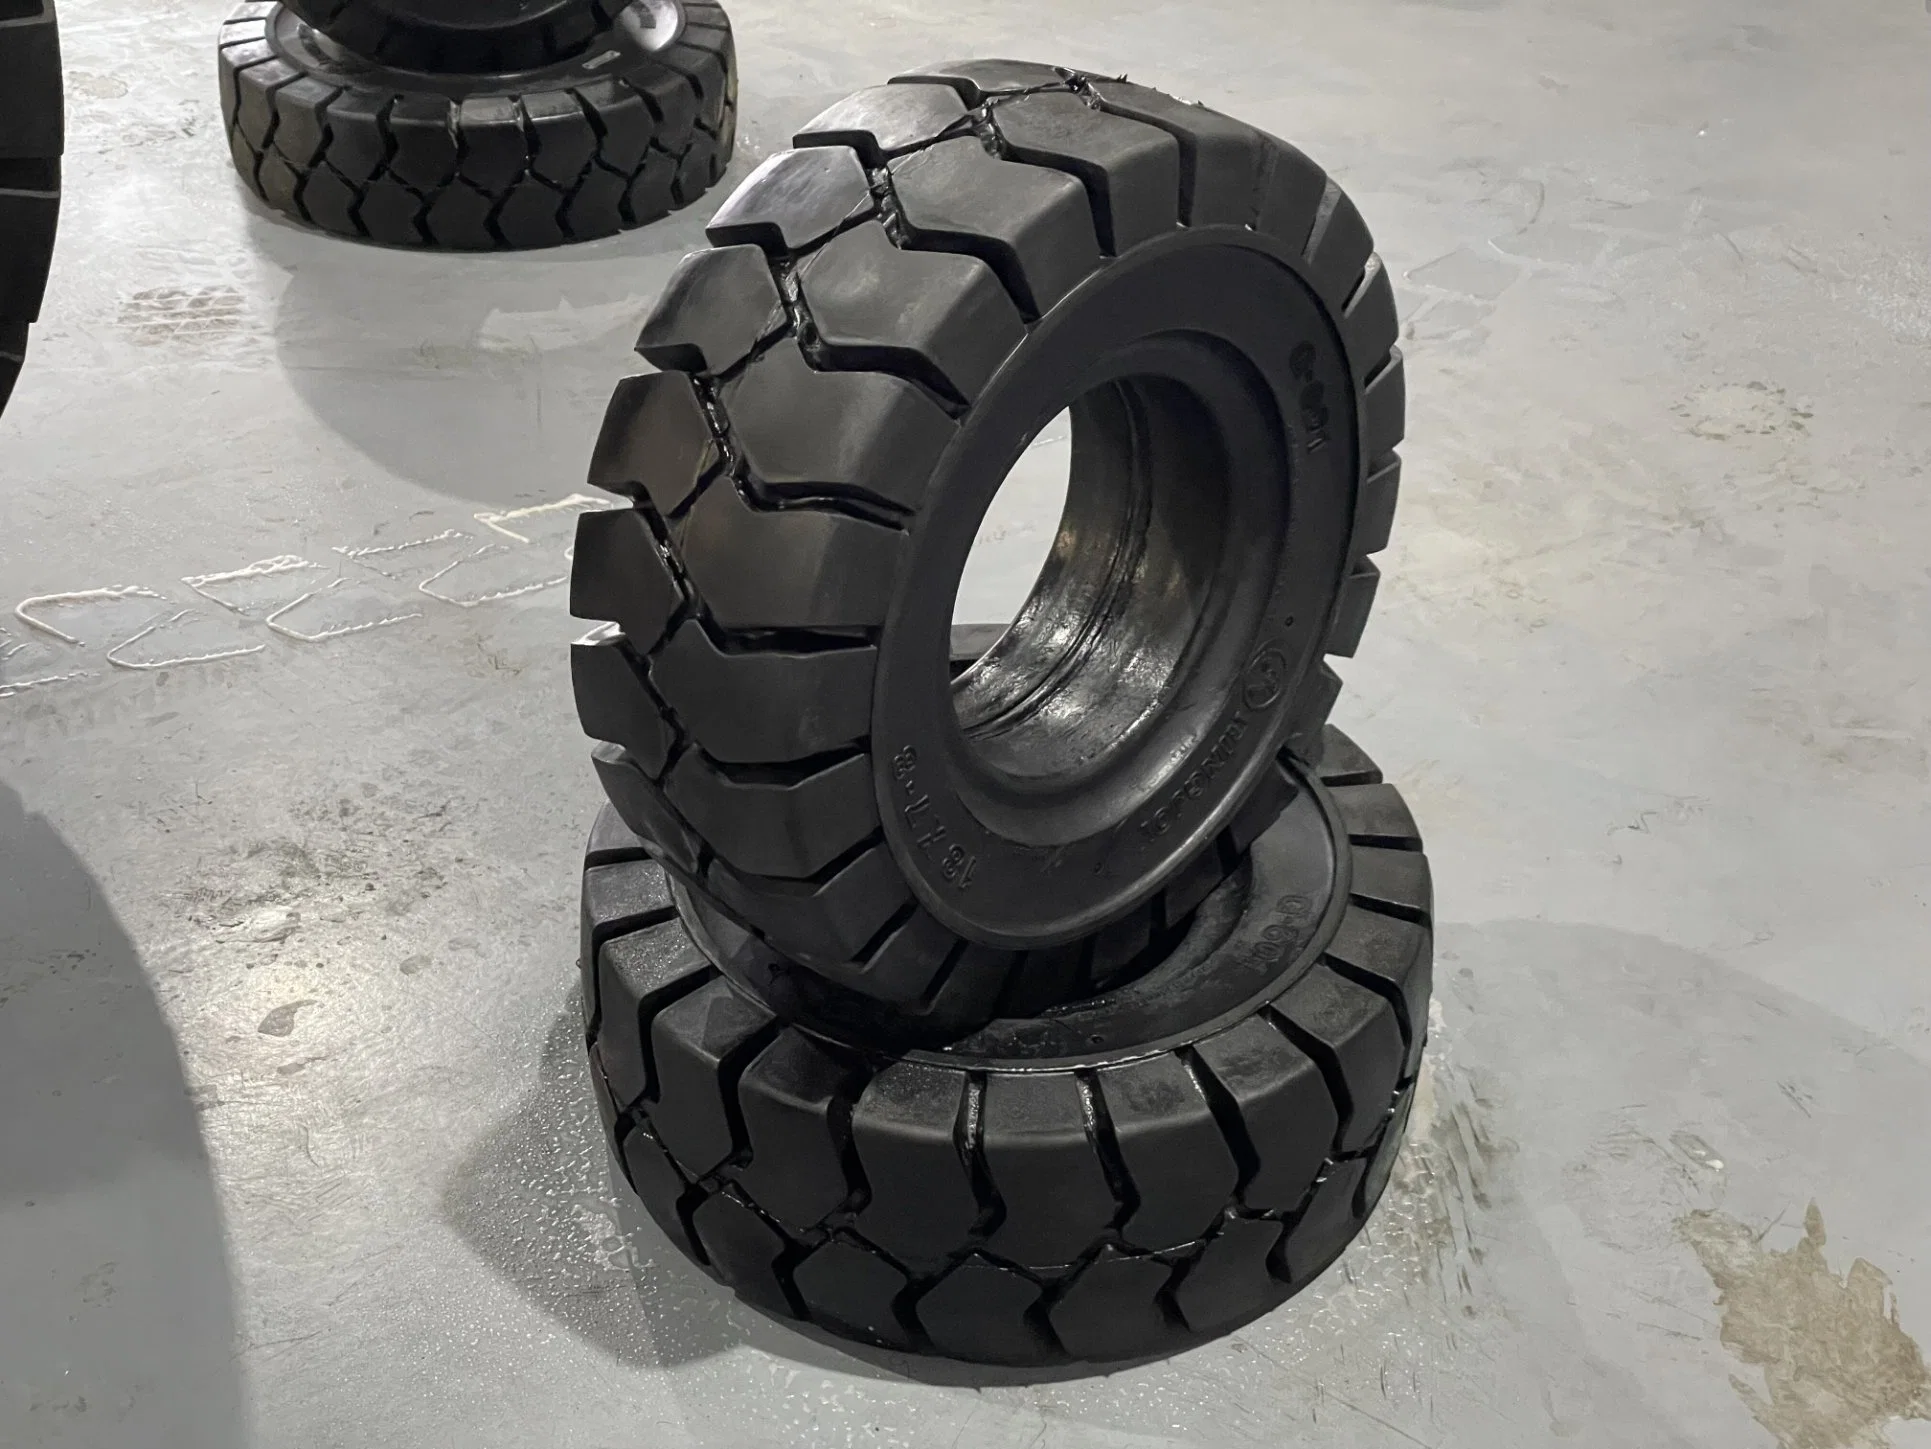 OTR TBR PCR Tyre Factory Tractor Solid Forklift Agriculatural Industrial ATV Truck Tire Manufacture Car Tyres Inner Tube Snow Winter Tires Mud Terrain Wheel Rim